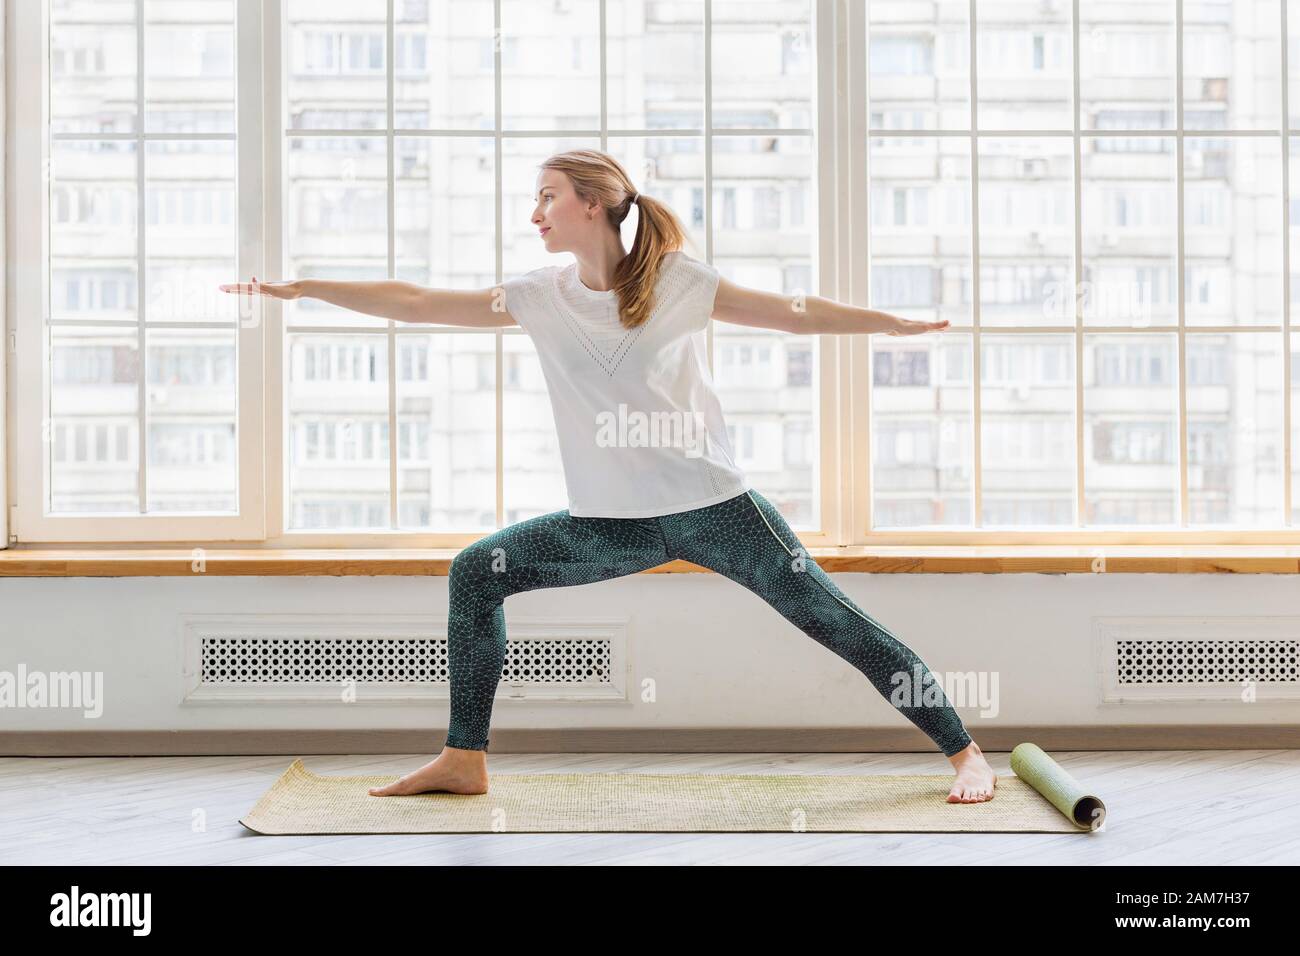 Young woman doing yoga on yoga mat in front of window Stock Photo